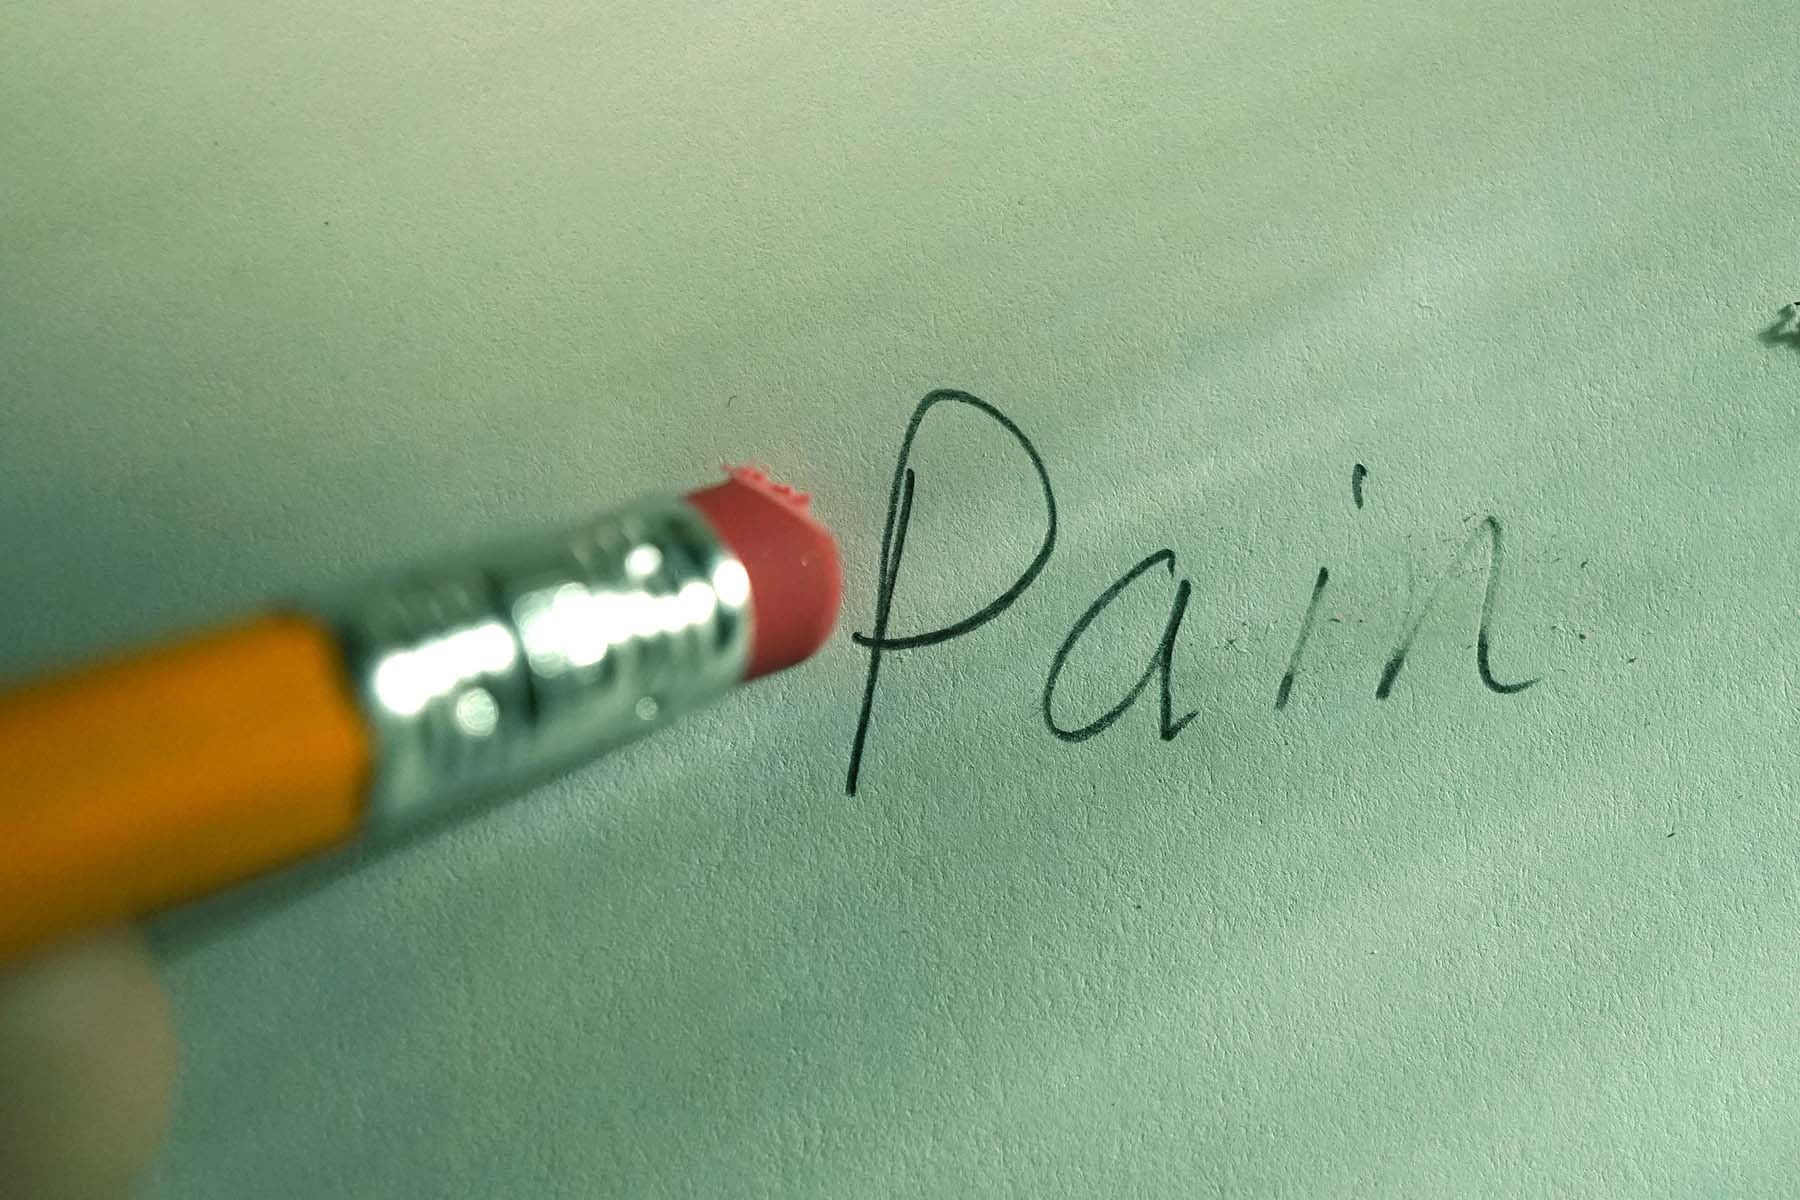 The butt of a pencil is shown erasing the word "Pain," which was written on paper.